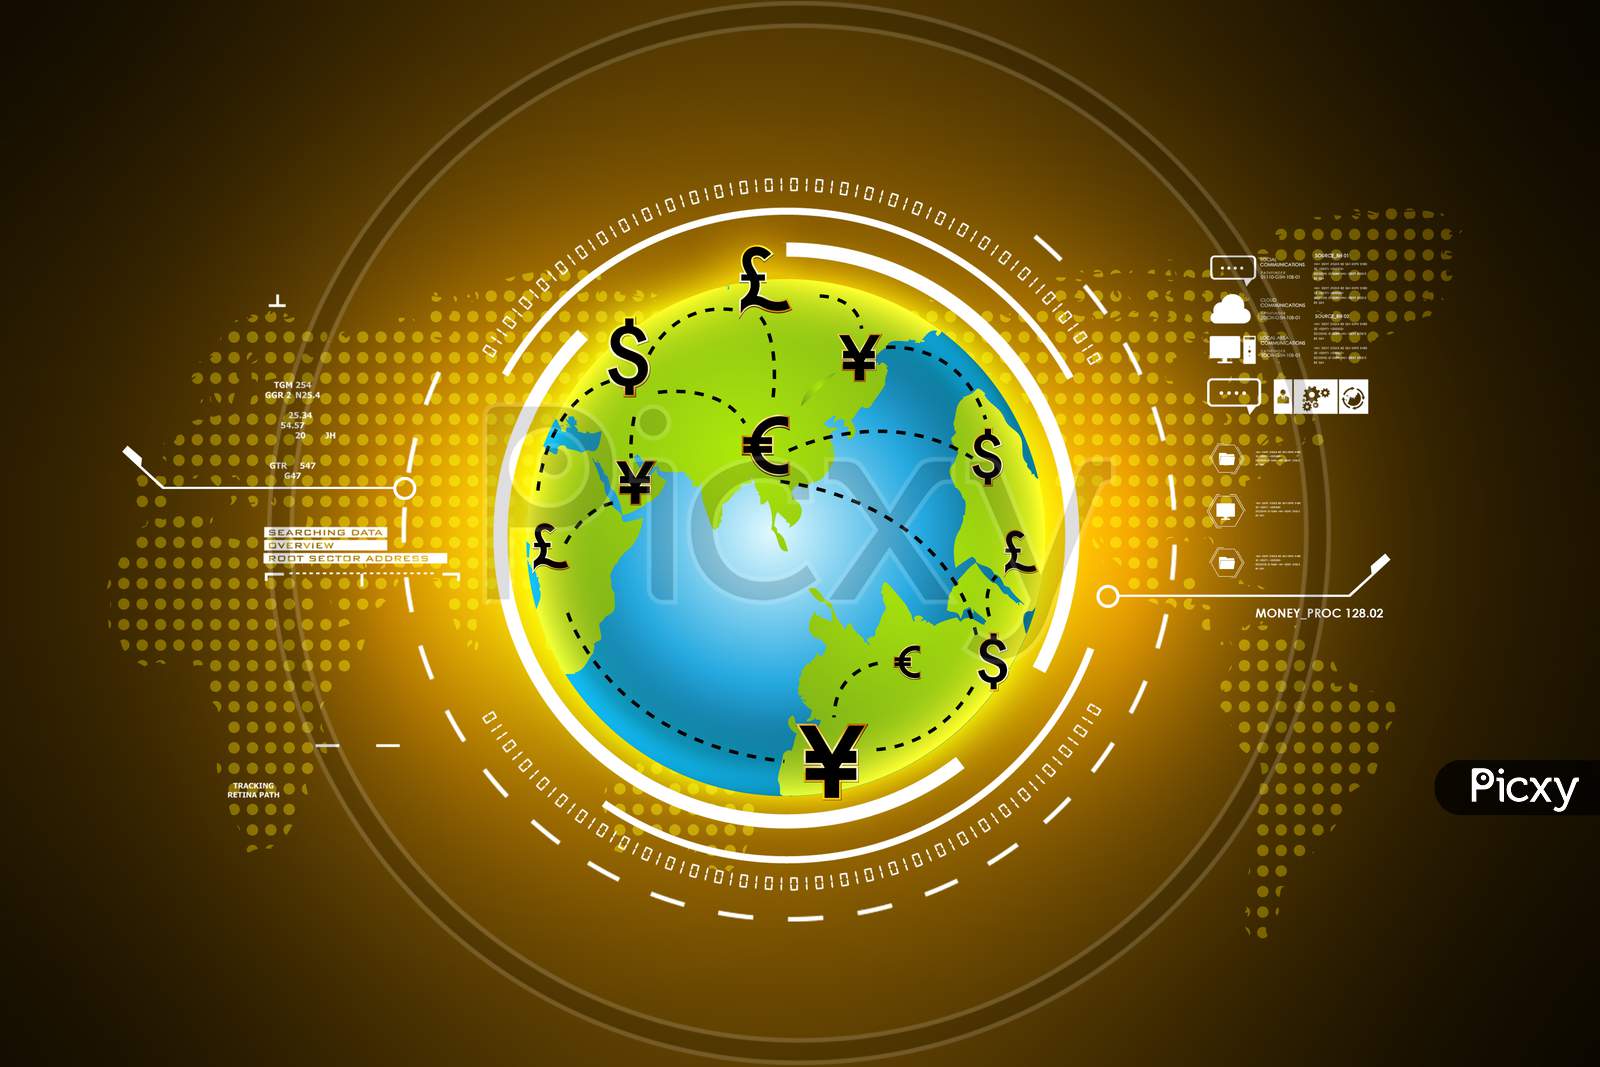 A 3D Globe with Yuan, Euro, Pound and Dollar Currency Symbols